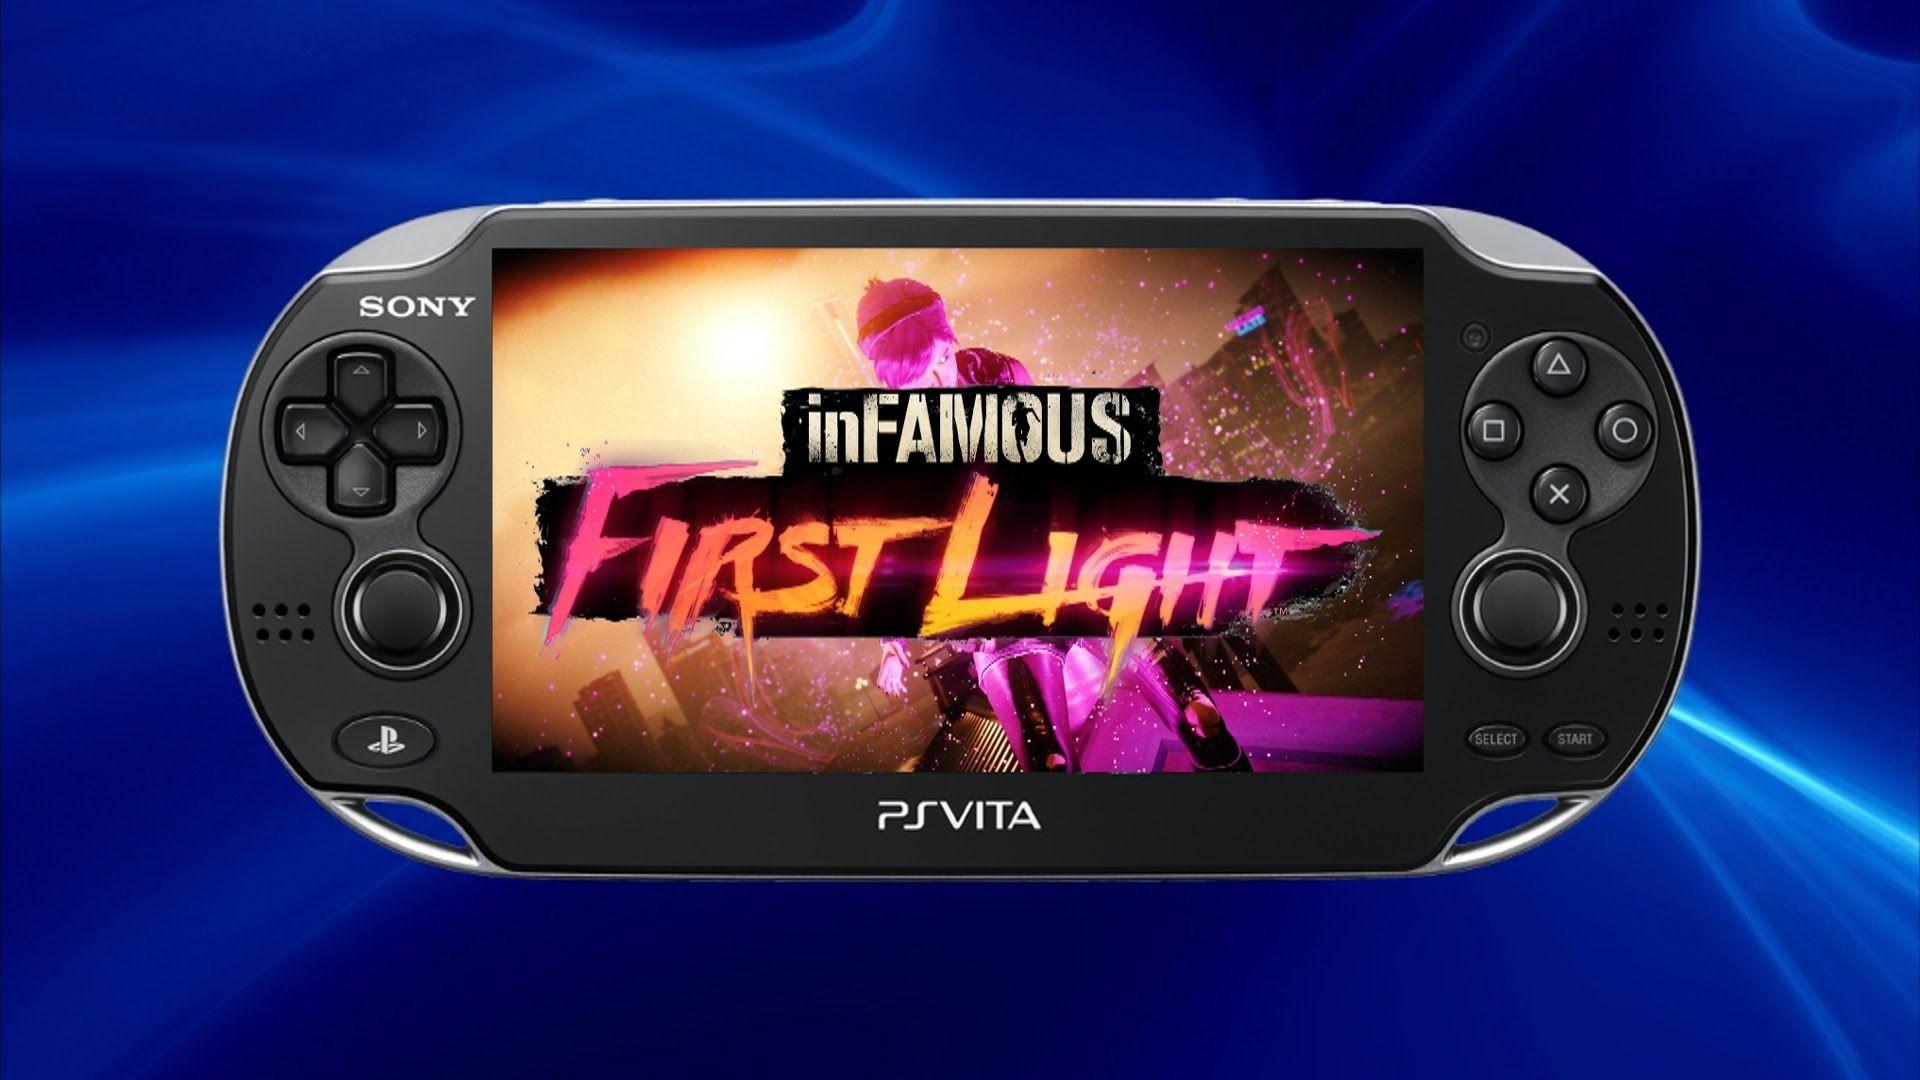 inFAMOUS First Light on PlayStation Vita via Remote Play